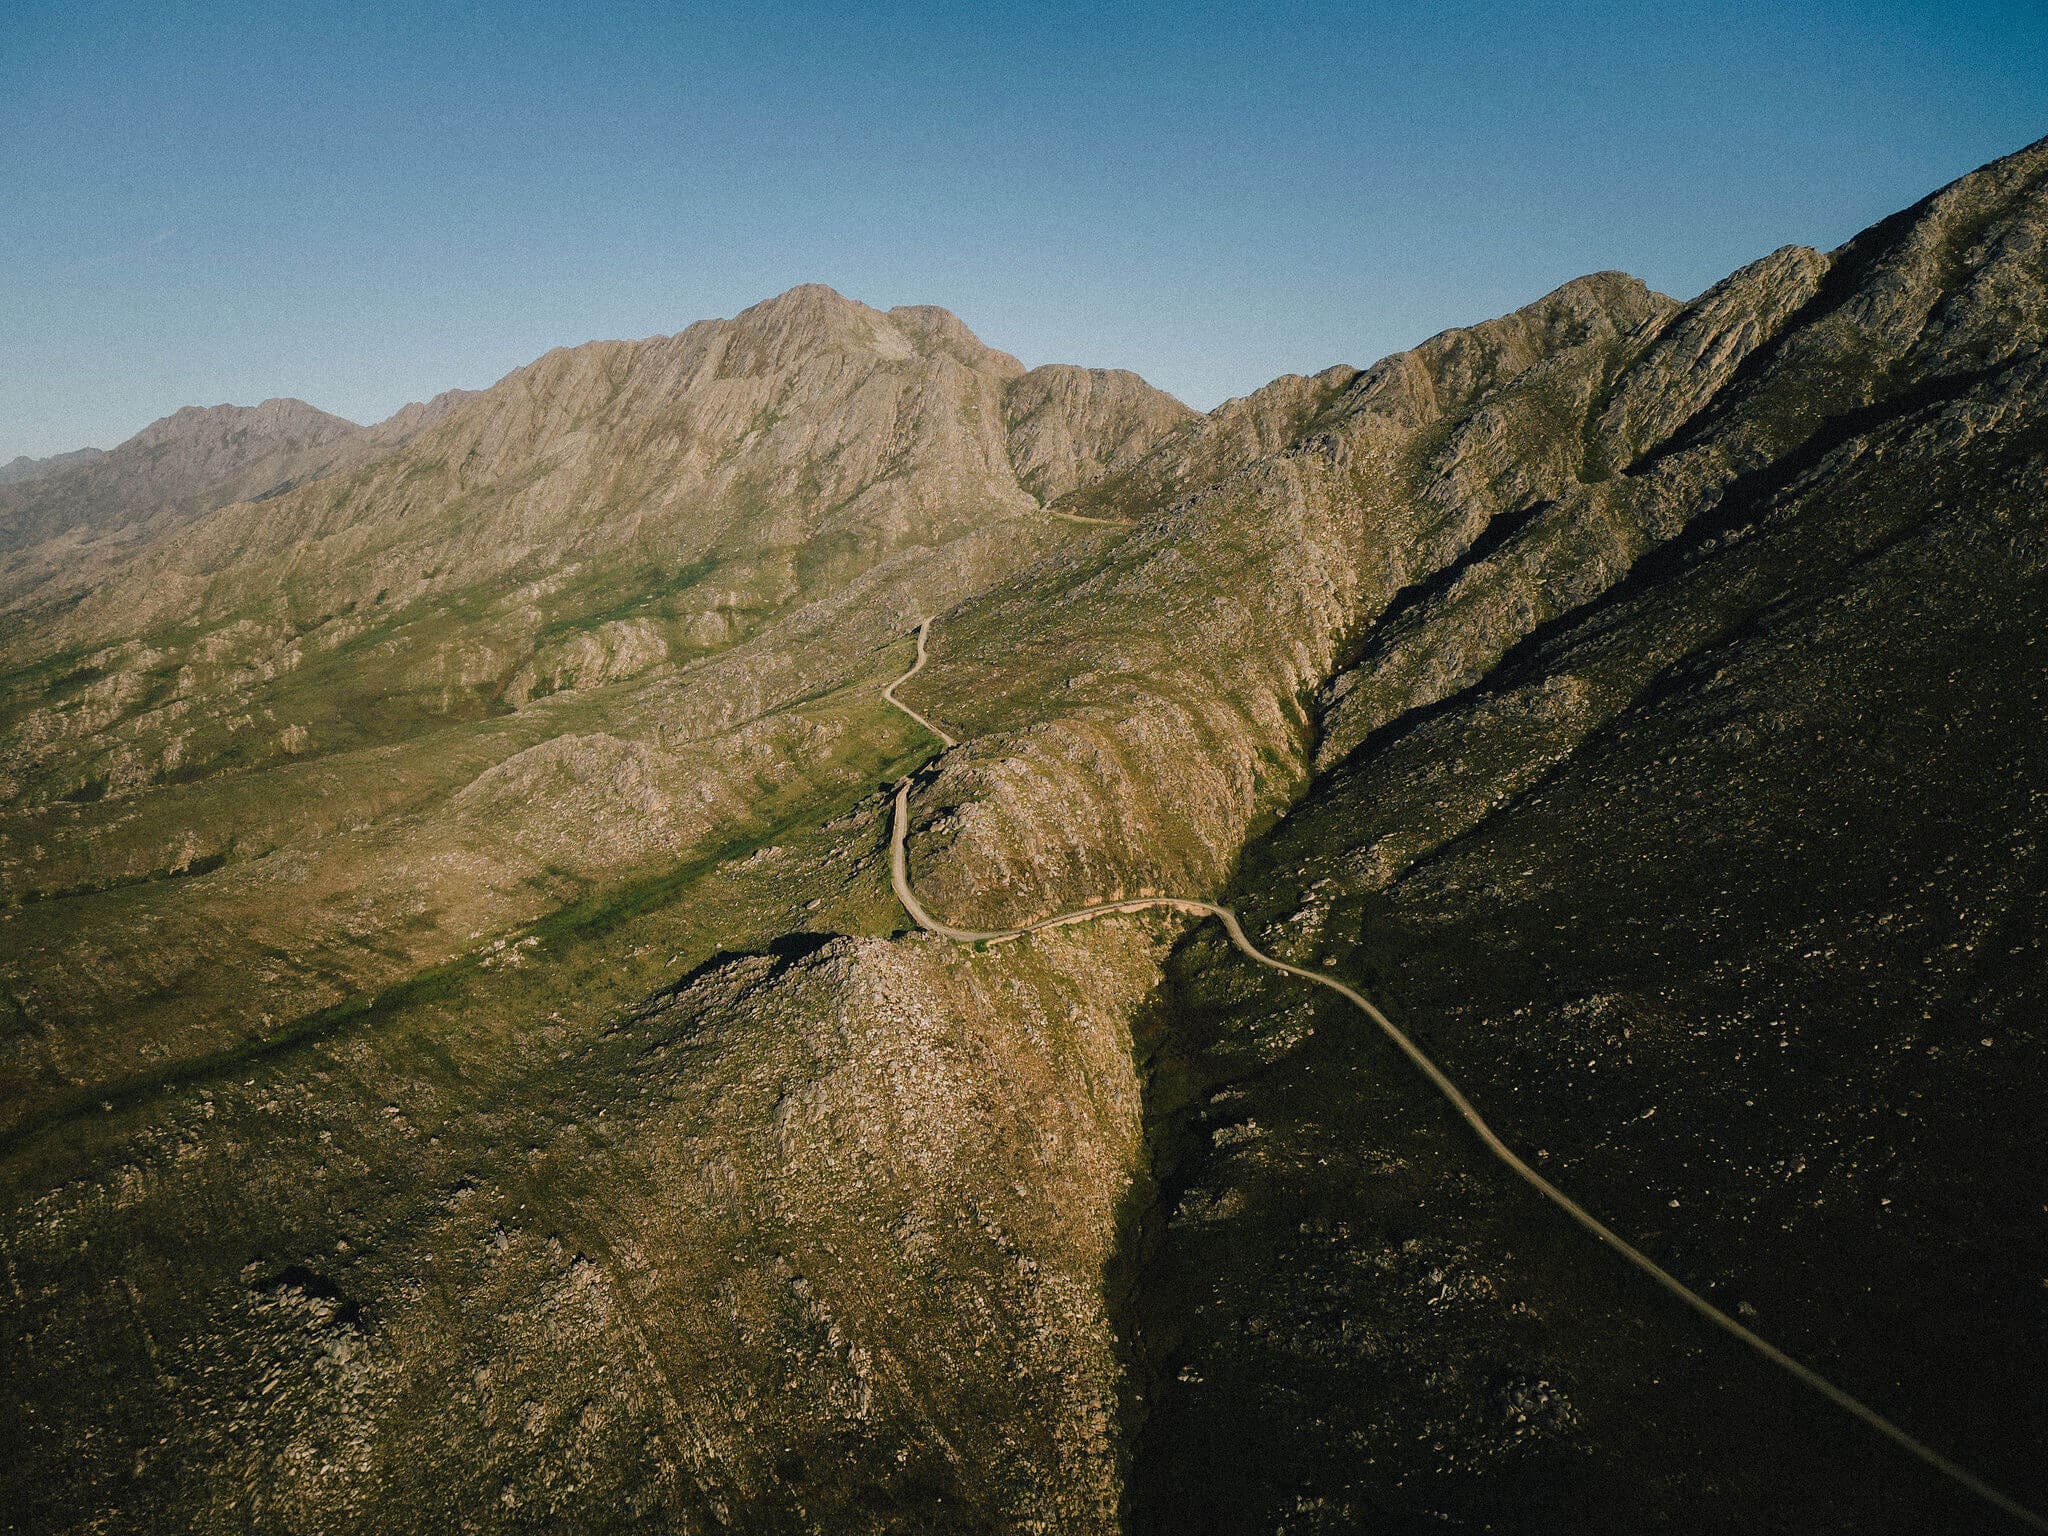 A winding road through the Swartberg Mountains in South Africa's Karoo, visited on a Slow Cyclist journey